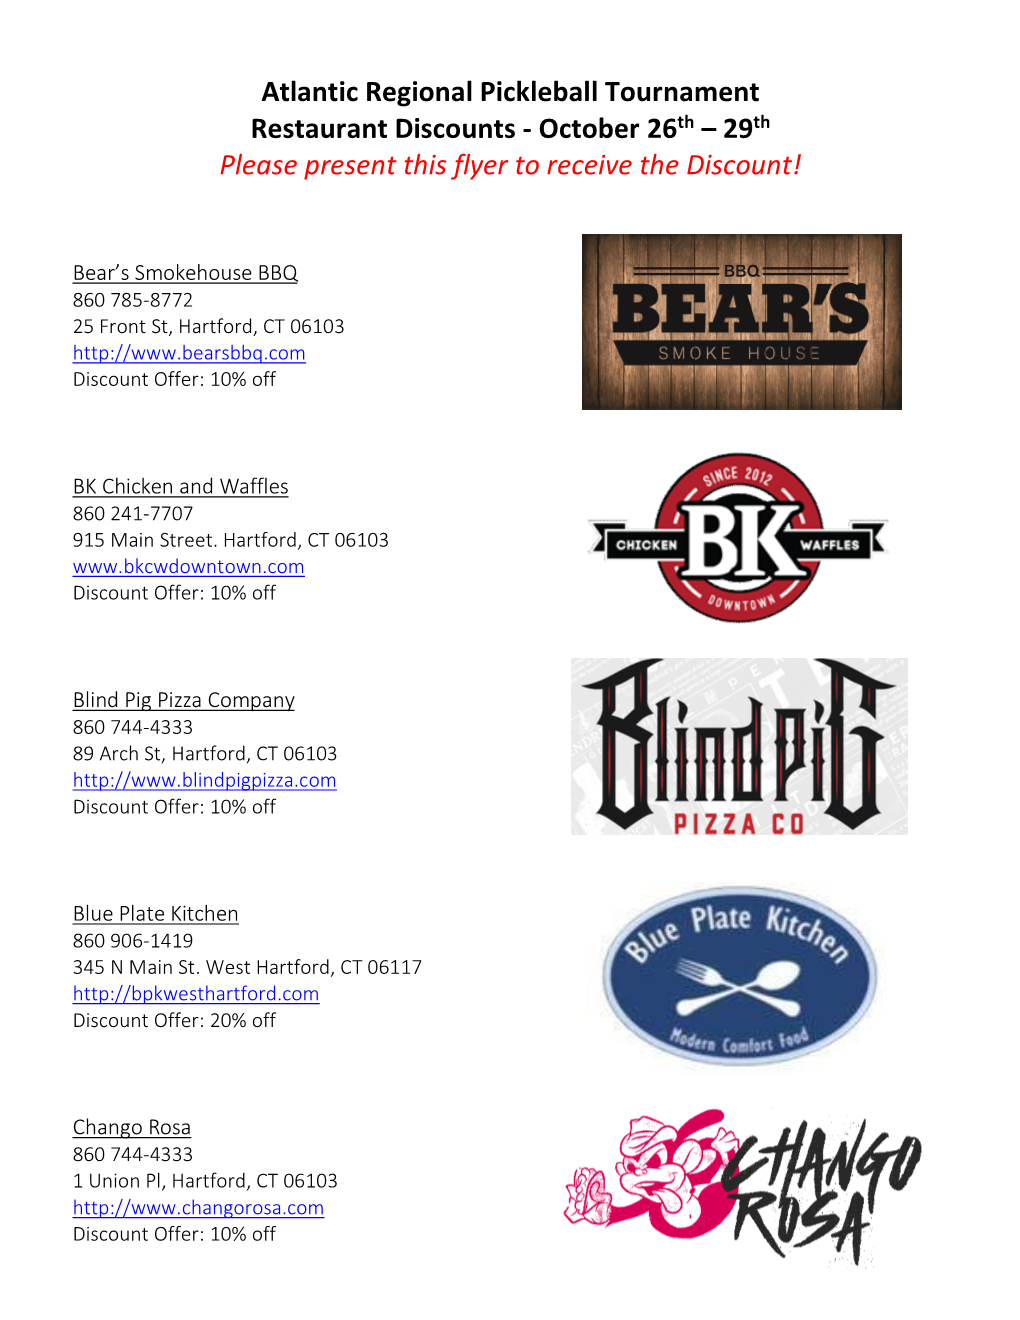 Atlantic Regional Pickleball Tournament Restaurant Discounts - October 26Th – 29Th Please Present This Flyer to Receive the Discount!